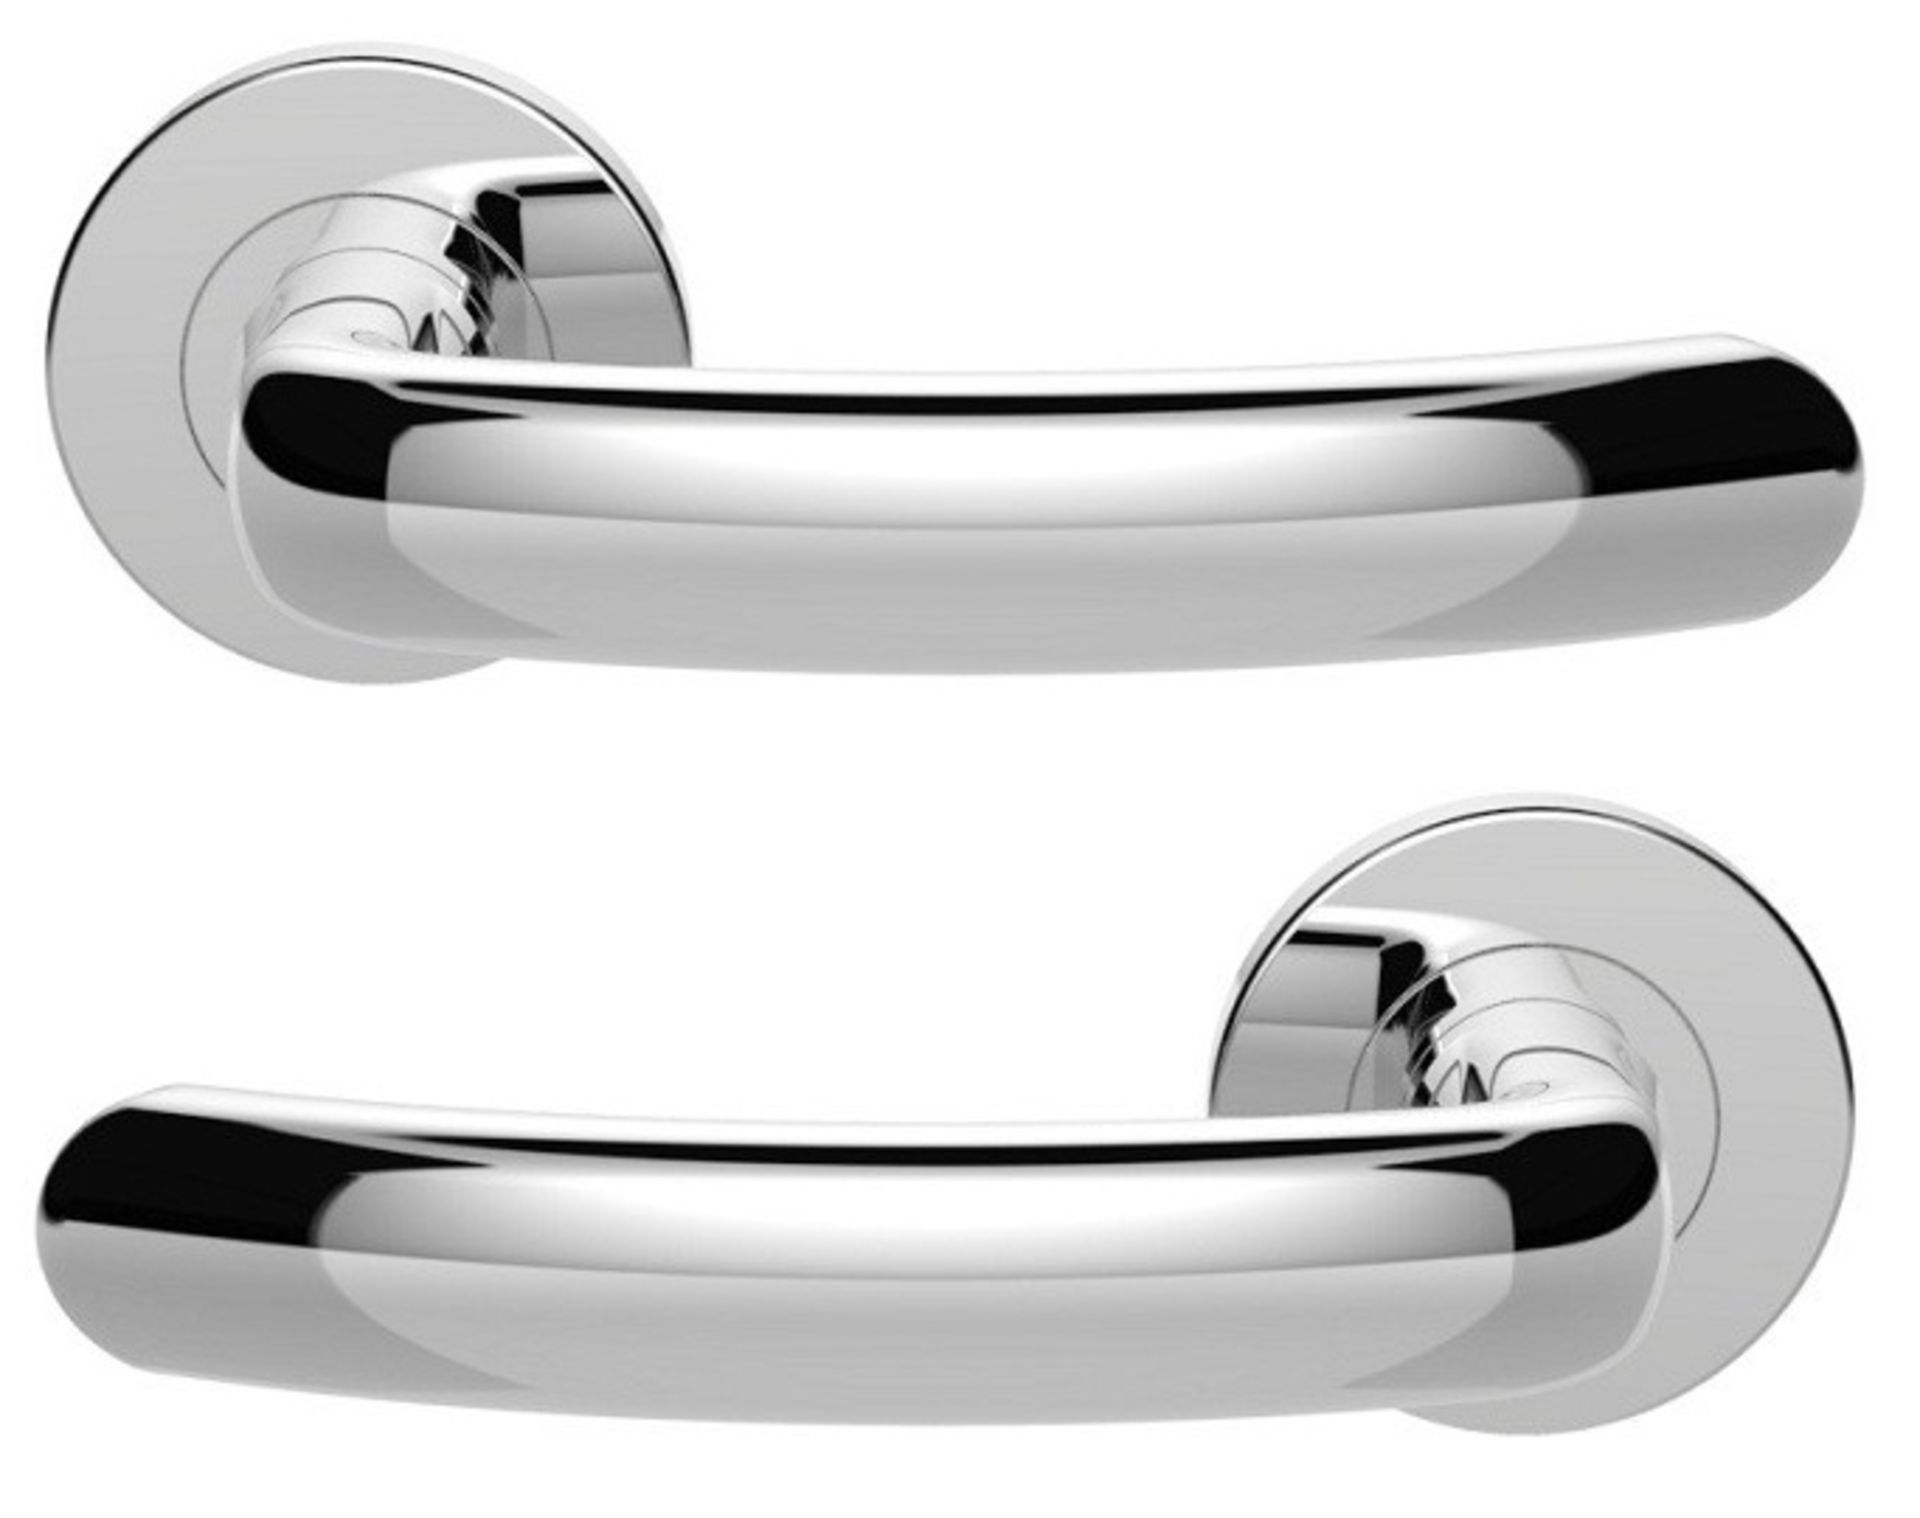 3 x Pairs of Serozzetta Internal Door Handle Levers in Polished Chrome - Brand New Stock - Product